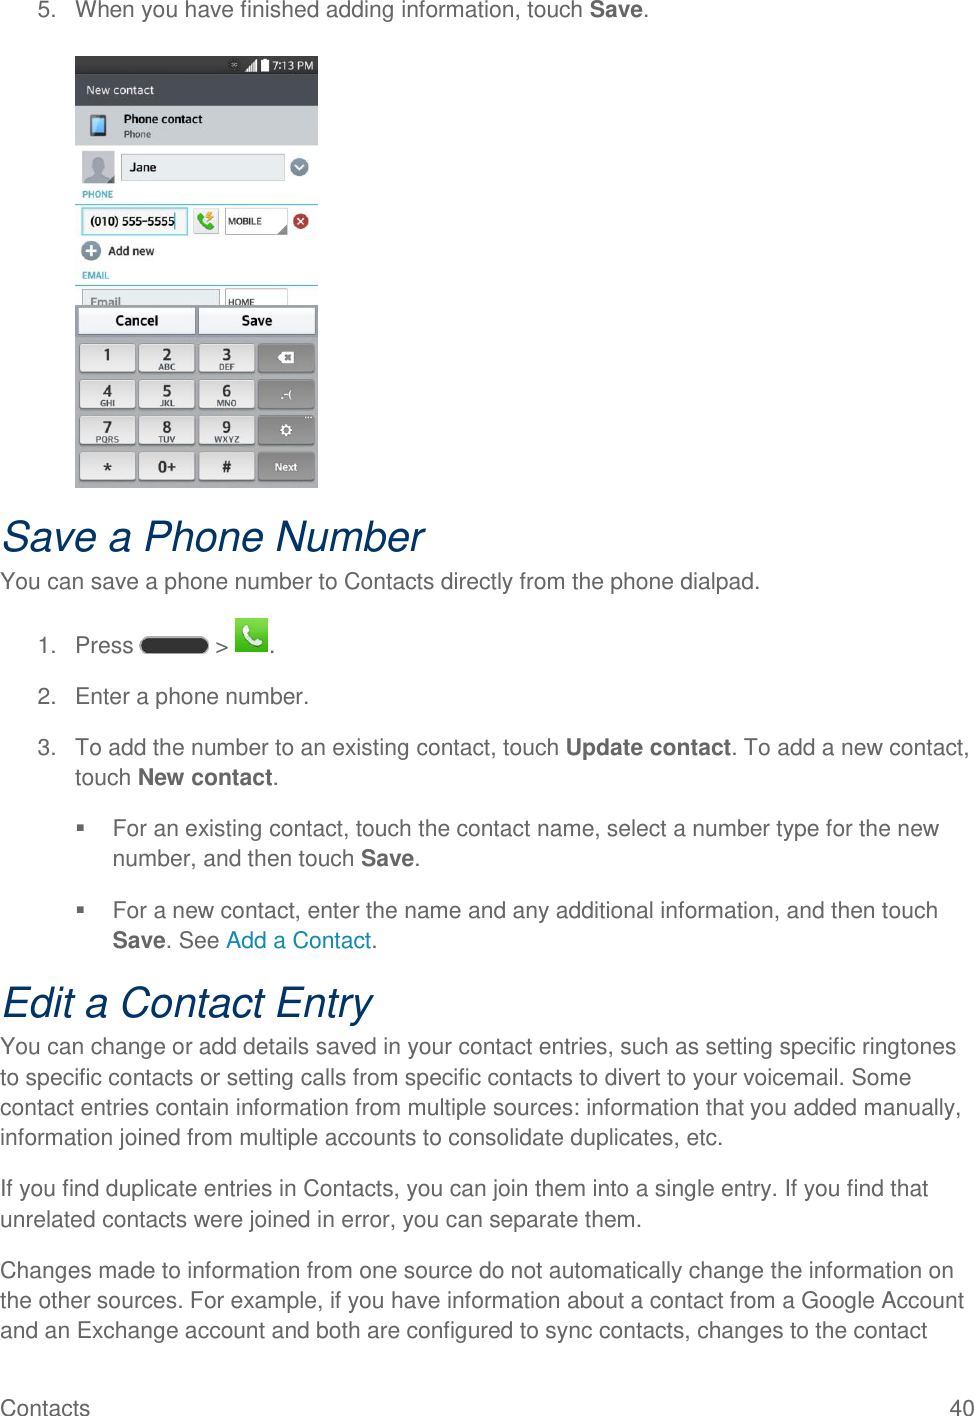 Contacts  40 5.  When you have finished adding information, touch Save.   Save a Phone Number You can save a phone number to Contacts directly from the phone dialpad. 1.  Press   &gt;  . 2.  Enter a phone number. 3.  To add the number to an existing contact, touch Update contact. To add a new contact, touch New contact.   For an existing contact, touch the contact name, select a number type for the new number, and then touch Save.   For a new contact, enter the name and any additional information, and then touch Save. See Add a Contact. Edit a Contact Entry You can change or add details saved in your contact entries, such as setting specific ringtones to specific contacts or setting calls from specific contacts to divert to your voicemail. Some contact entries contain information from multiple sources: information that you added manually, information joined from multiple accounts to consolidate duplicates, etc. If you find duplicate entries in Contacts, you can join them into a single entry. If you find that unrelated contacts were joined in error, you can separate them. Changes made to information from one source do not automatically change the information on the other sources. For example, if you have information about a contact from a Google Account and an Exchange account and both are configured to sync contacts, changes to the contact 